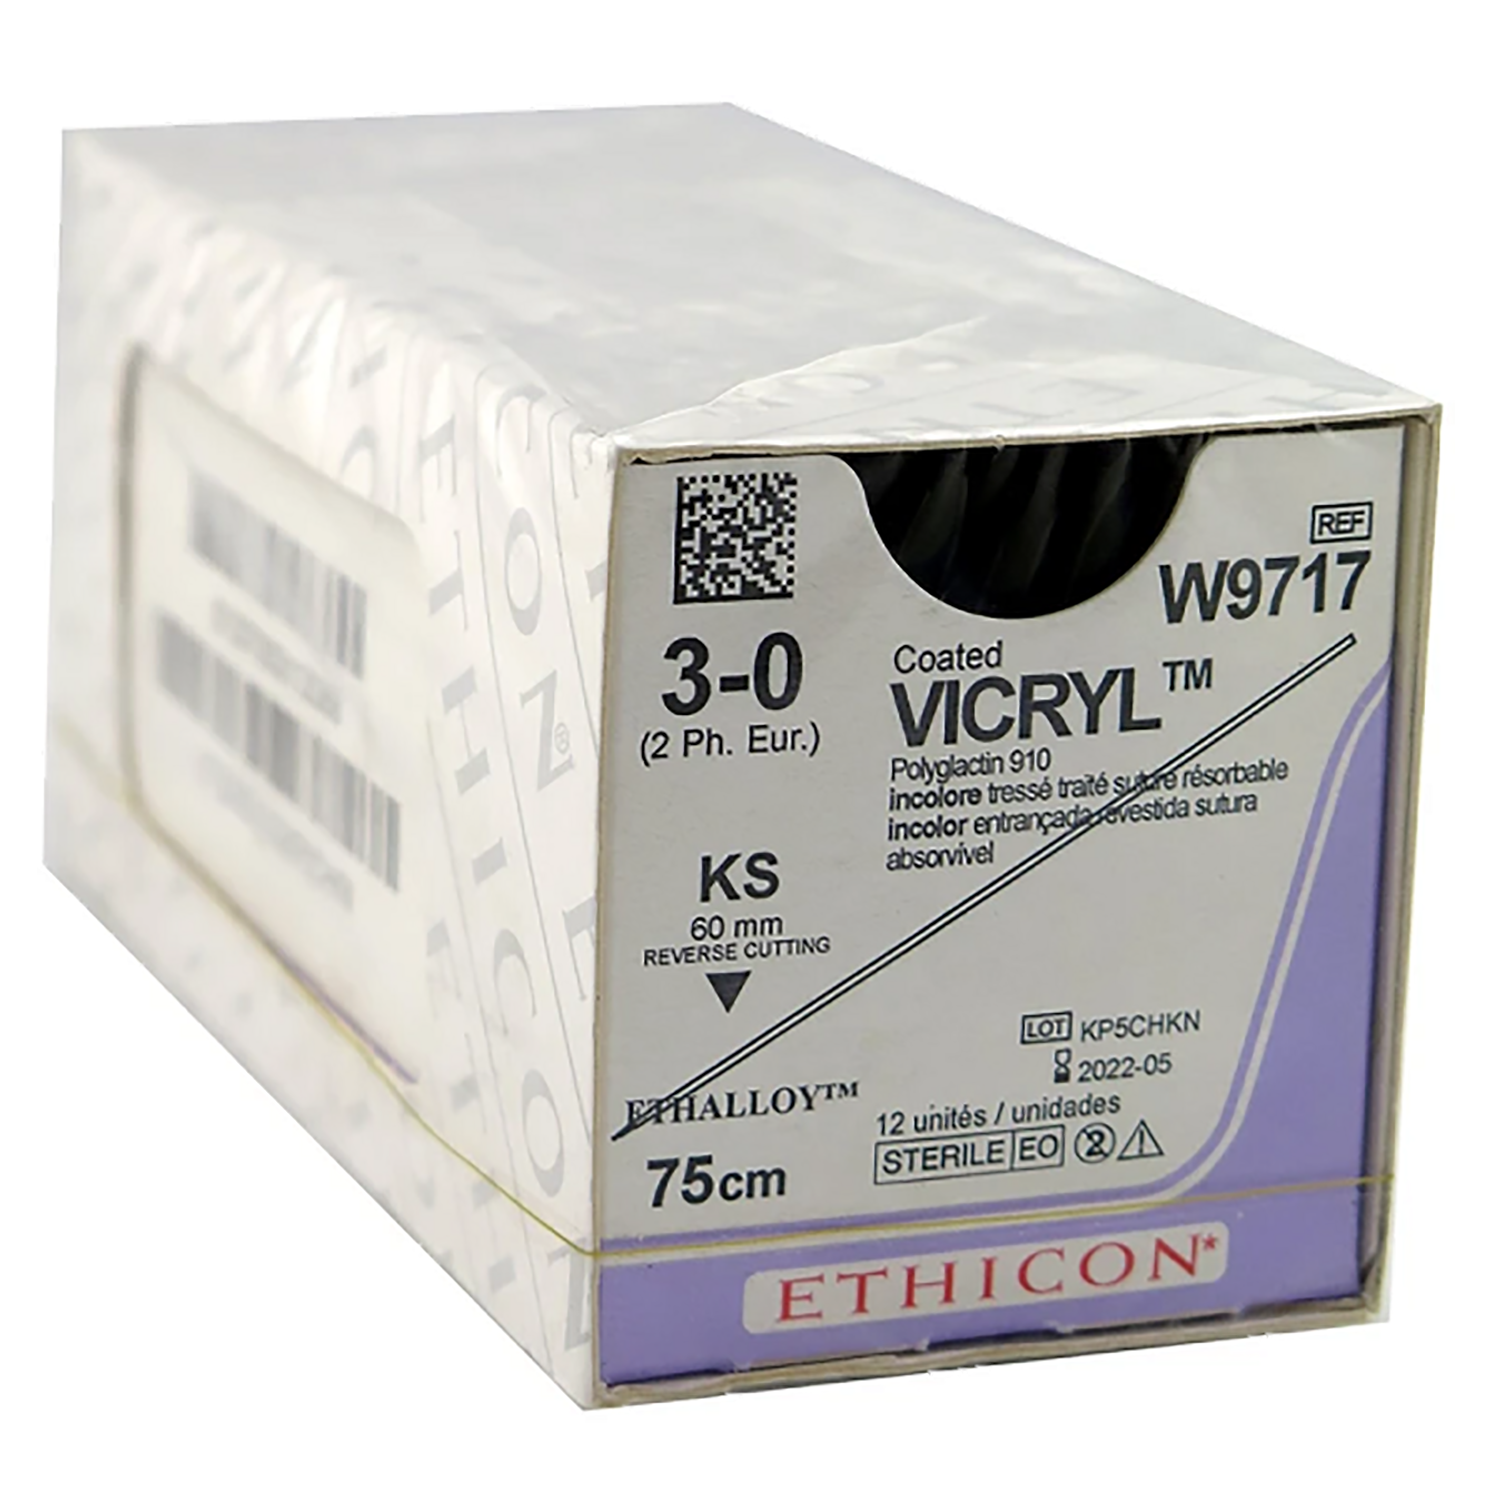 Ethicon Coated Vicryl Suture | Absorbable | Undyed | Size: 3-0 | Length: 75 | Needle: KS | Pack of 12 (1)